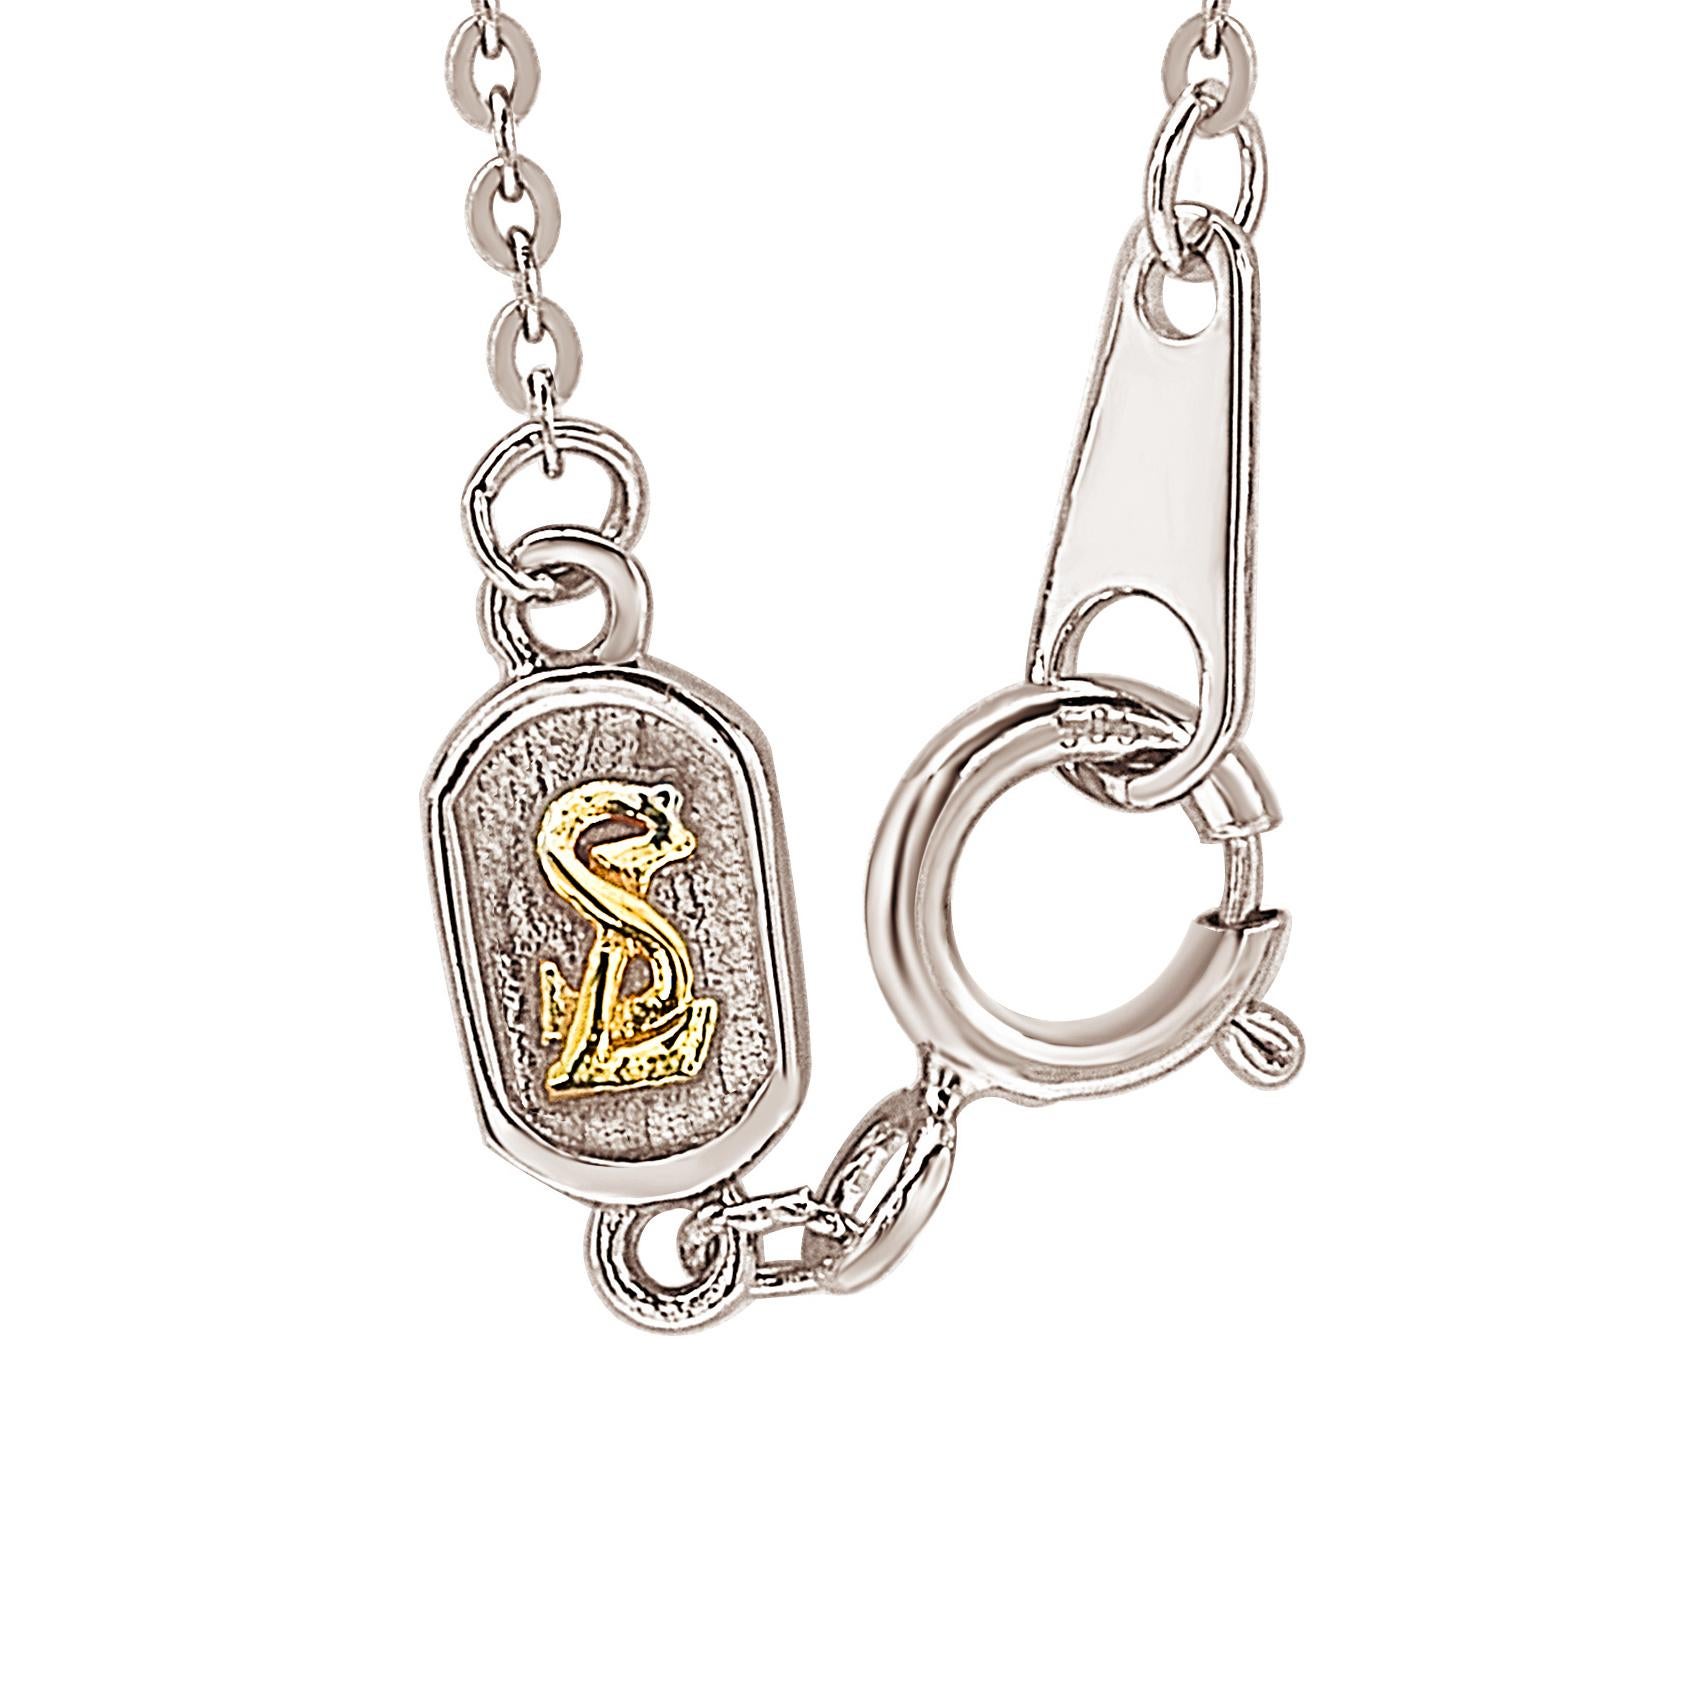 This elegant necklace is available in your choice of stunning 14k white, yellow or rose gold. The chain accentuated with twelve glittering diamonds for a charming look and a lobster claw clasp for secure fit. Suzy Levian is a guarantee brand for